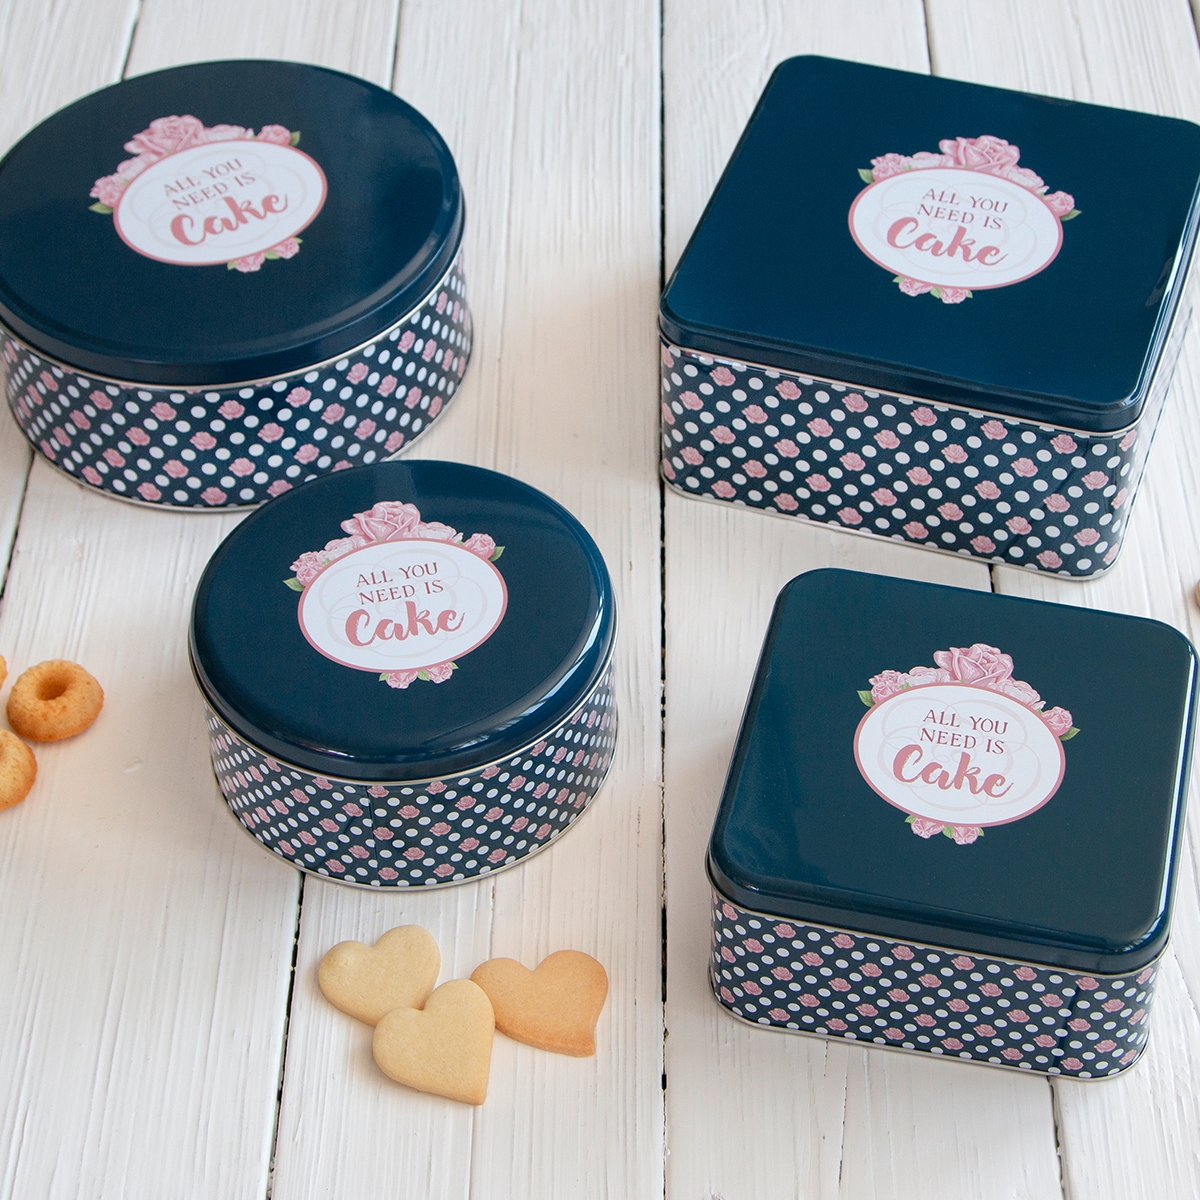 Städter - Cookie box - All you need is Cake - Colorful - different sizes and shapes